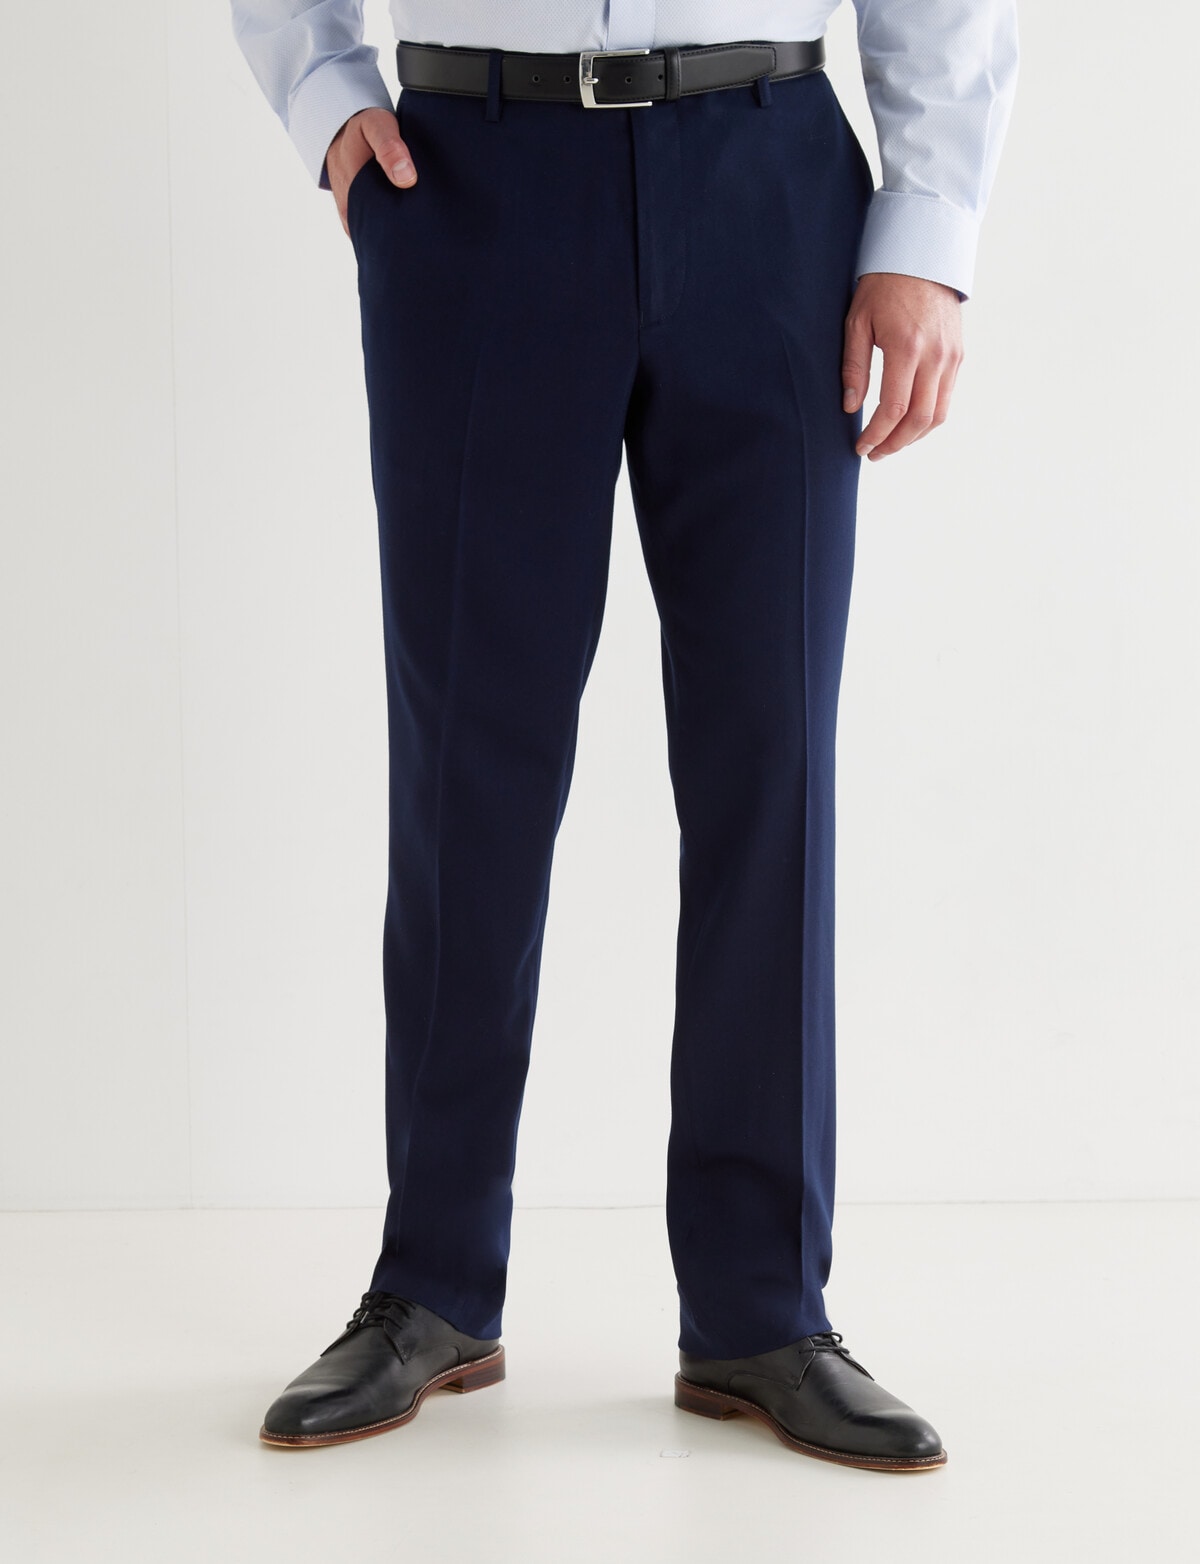 Chisel Formal Classic Herringbone Flat Front Pant, Navy - Suit Jackets ...